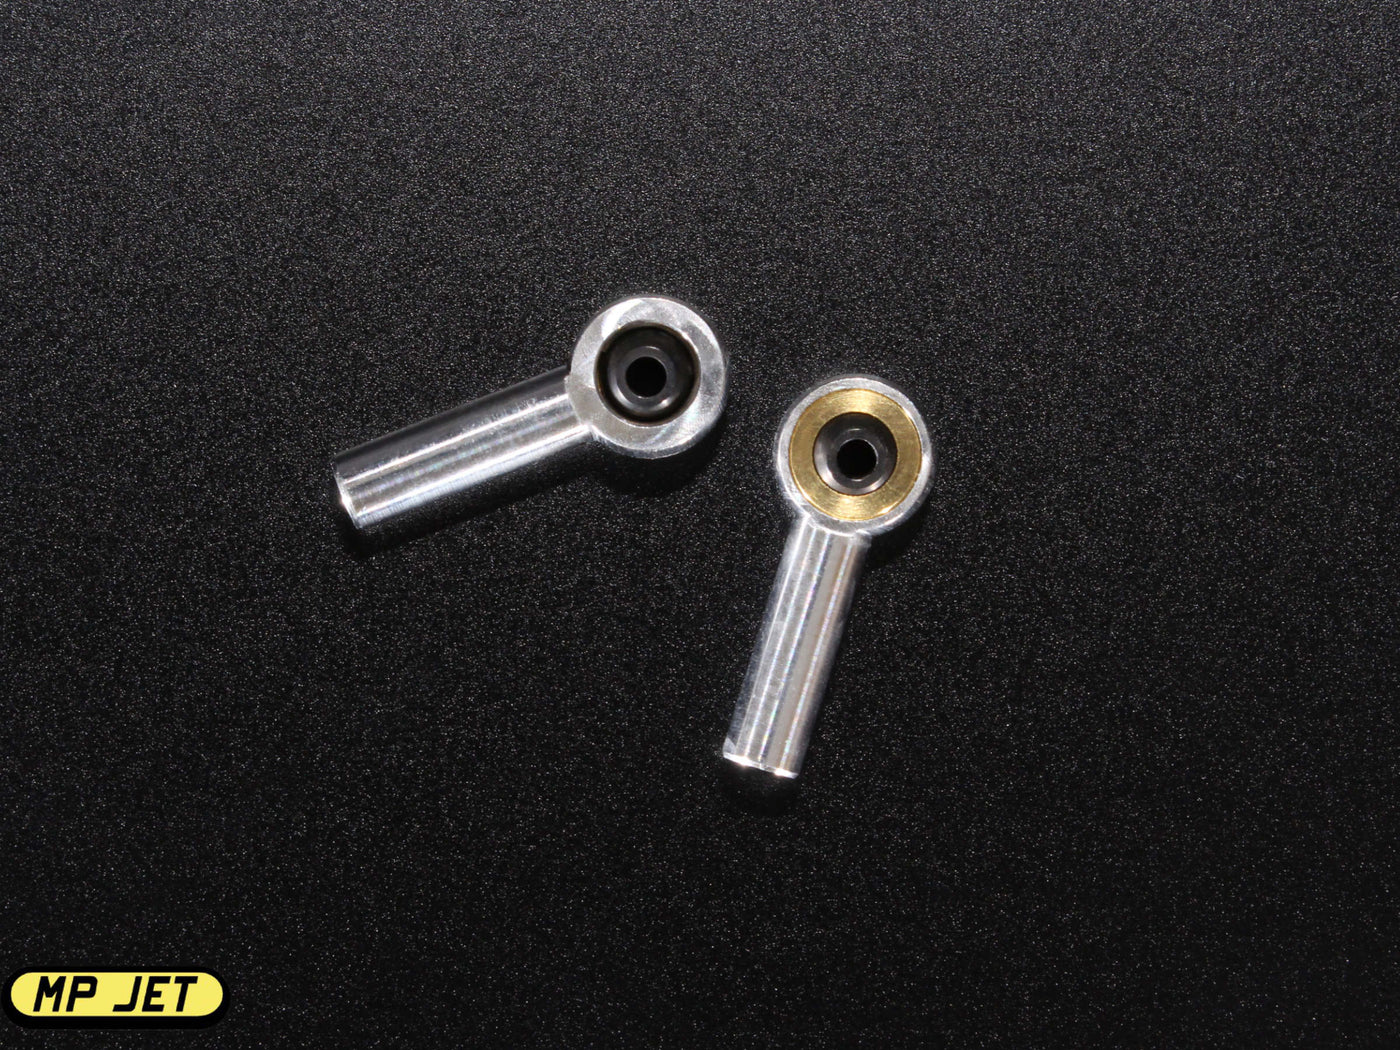 MP Jet Ball Link V3 / 5mm ball with 2mm hole / M2